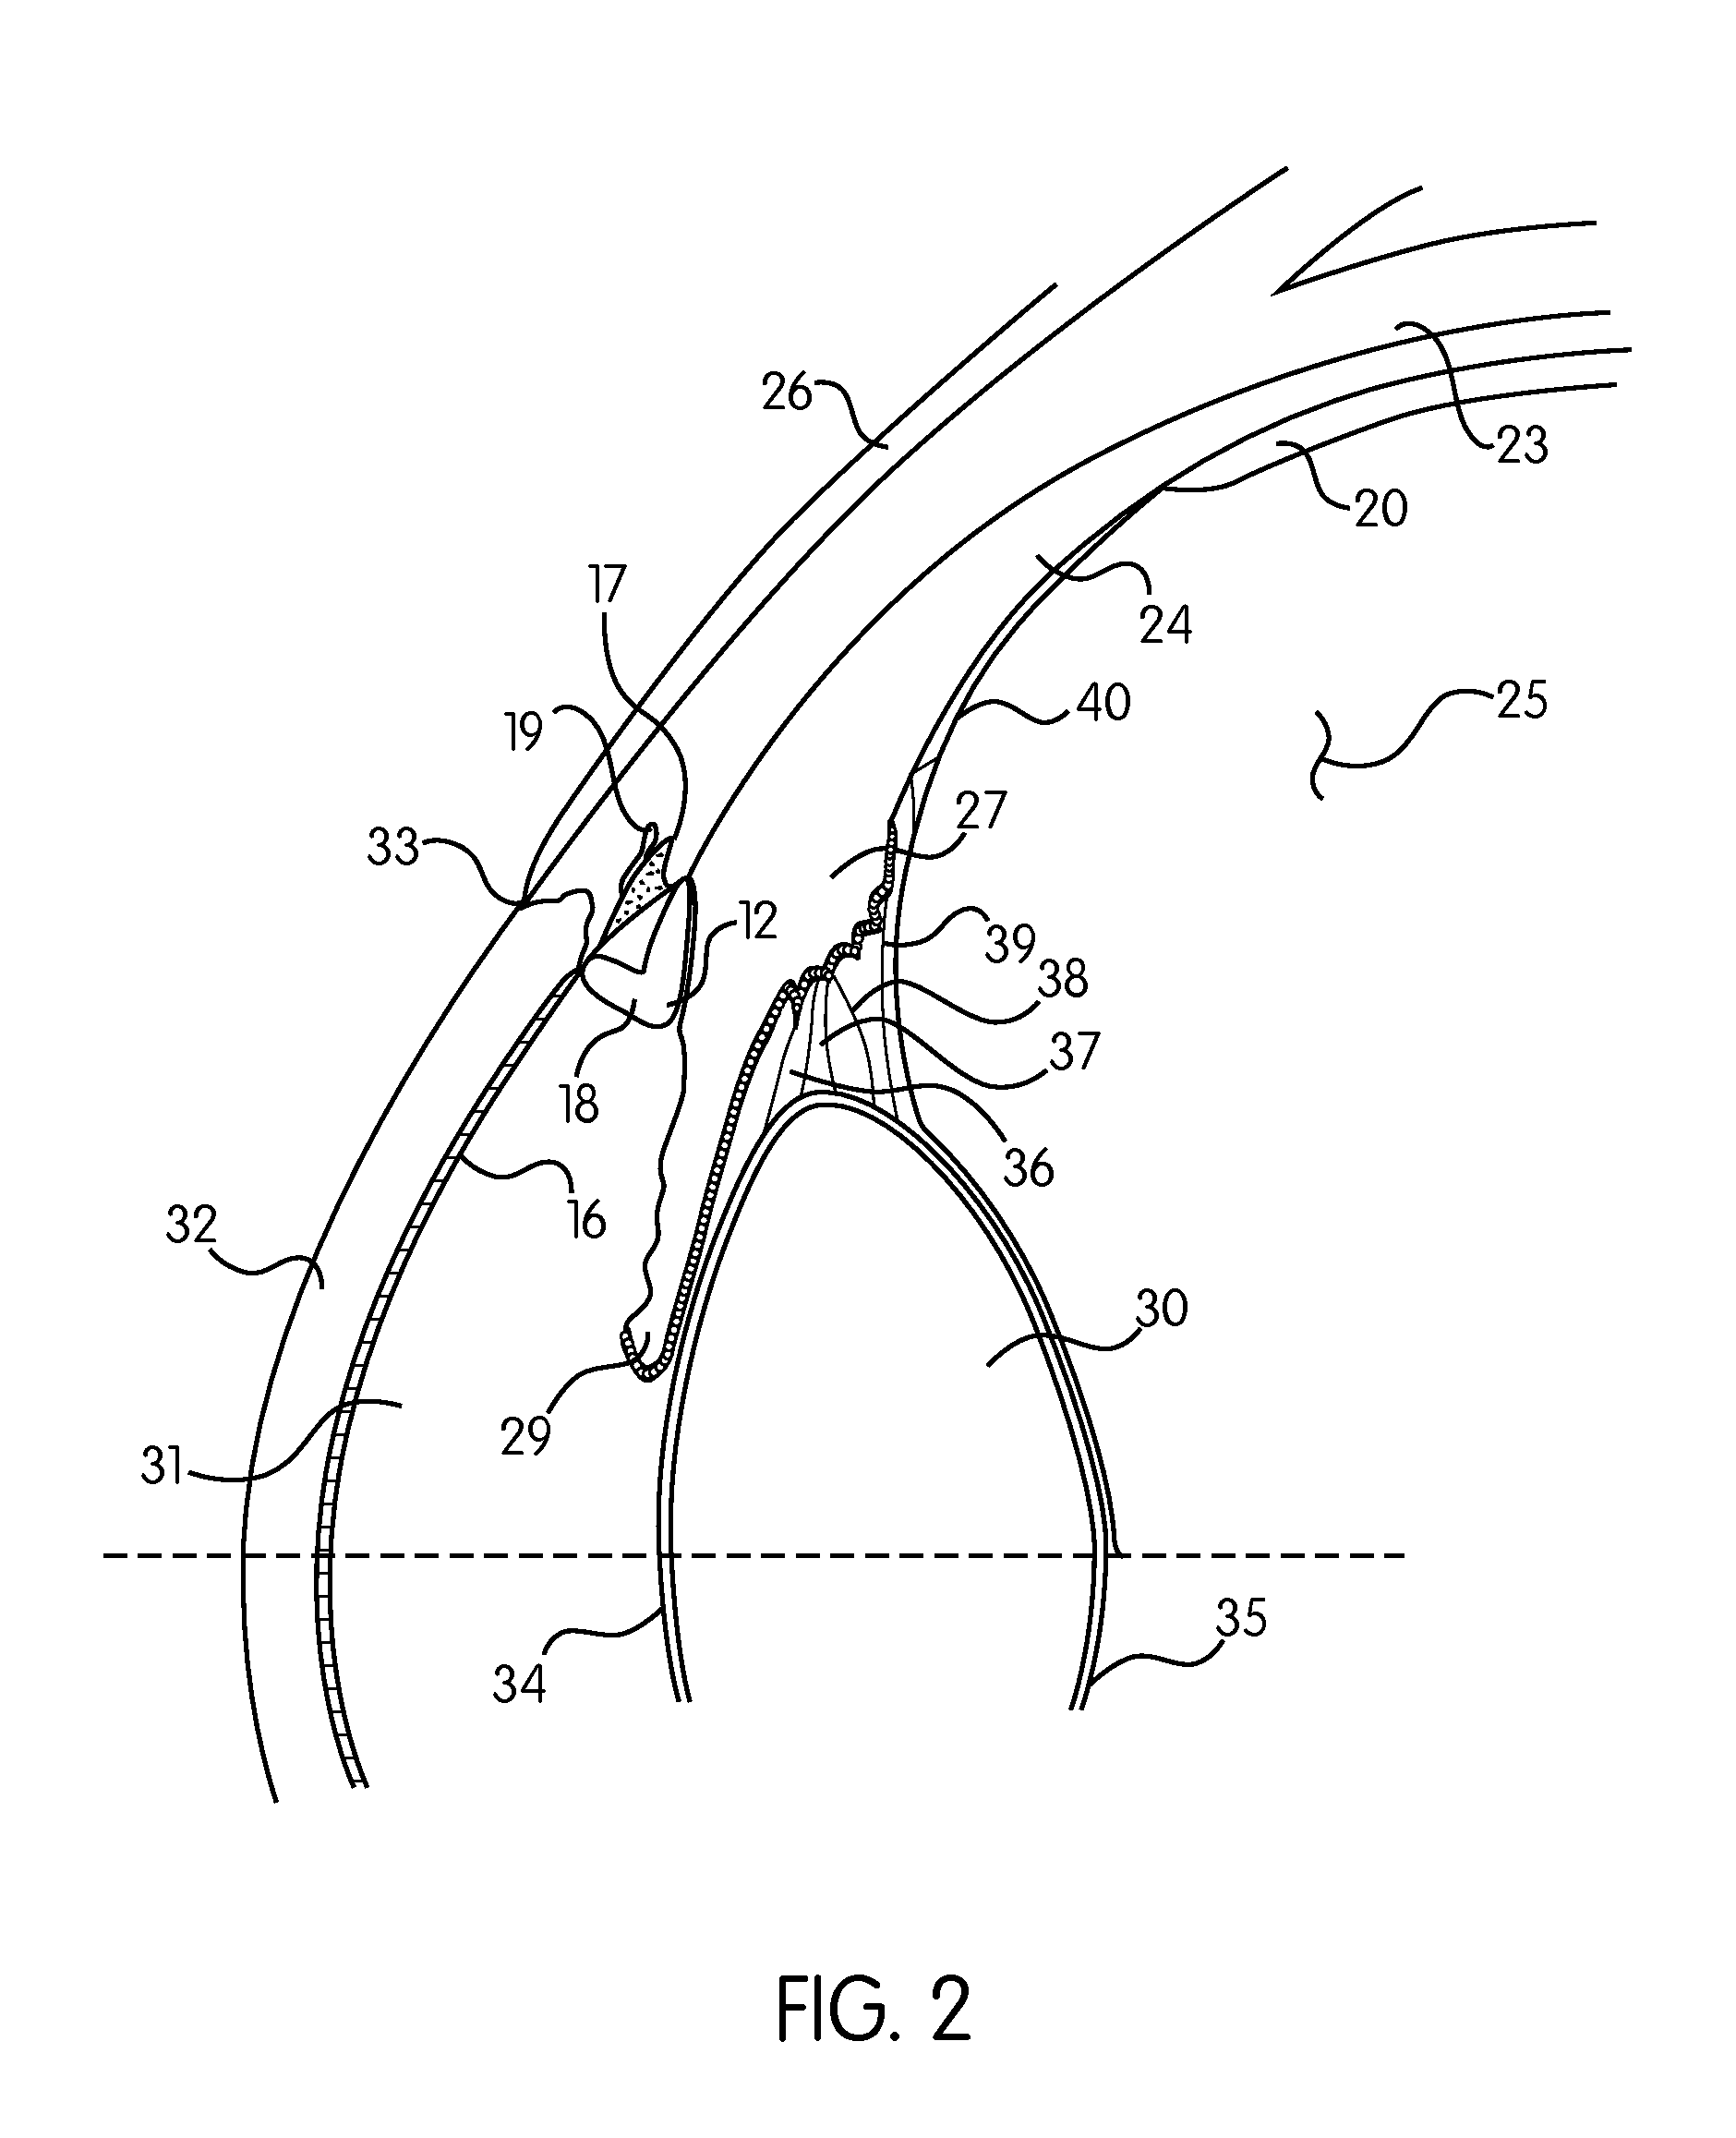 Ocular collar stent for treating narrowing of the irideocorneal angle